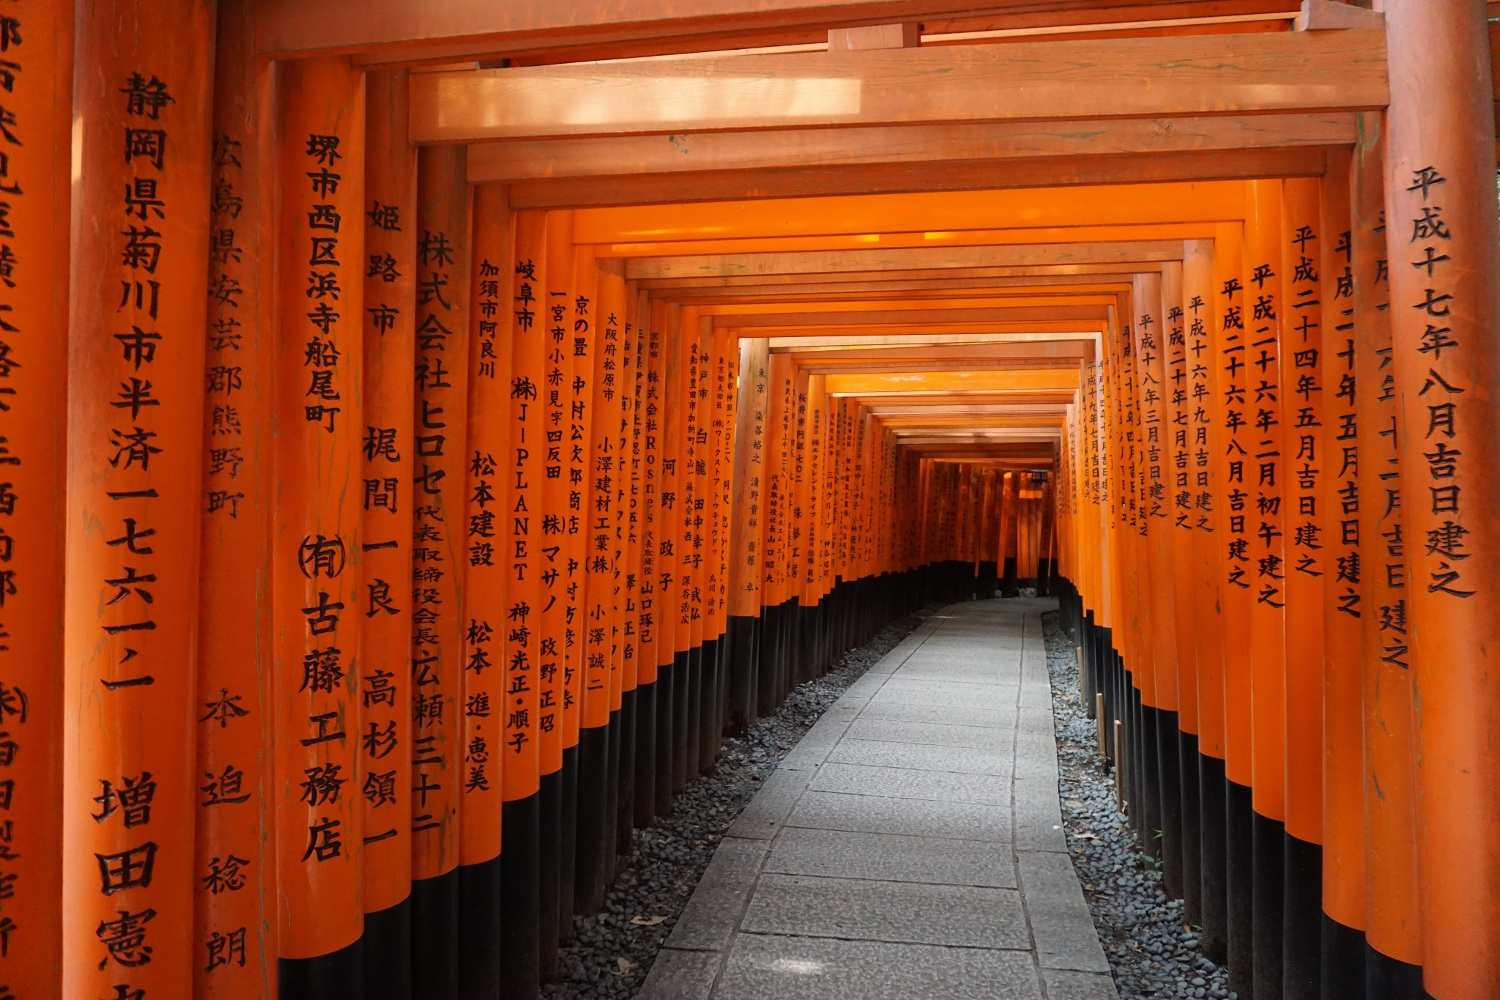 A complete guide to Kyoto, Japan